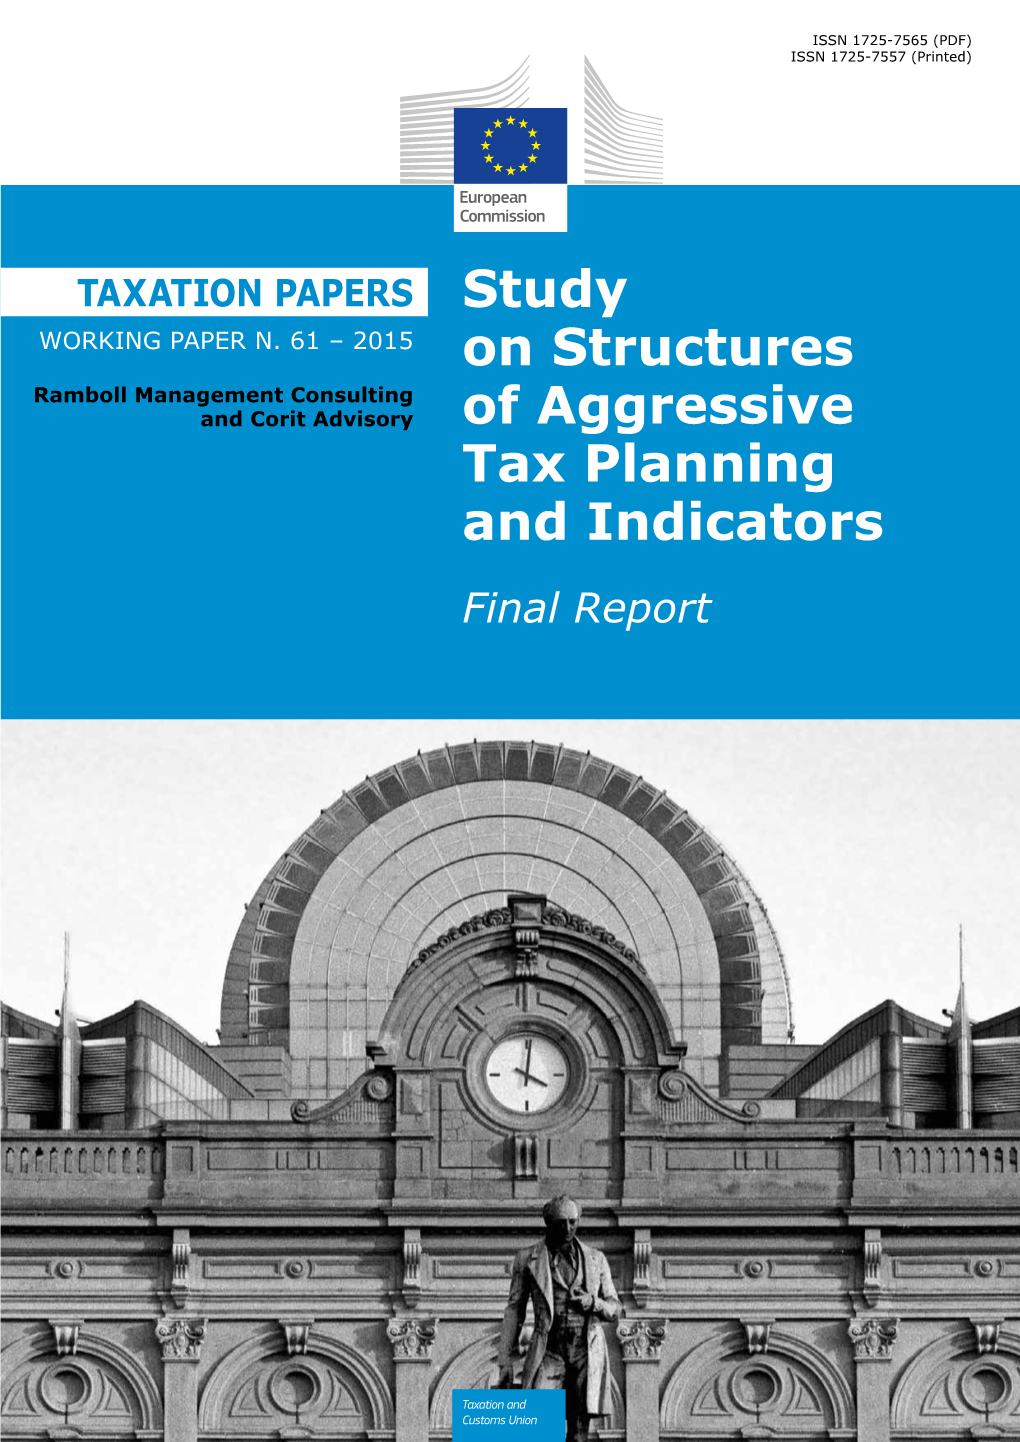 Study on Structures of Aggressive Tax Planning and Indicators - Final Report